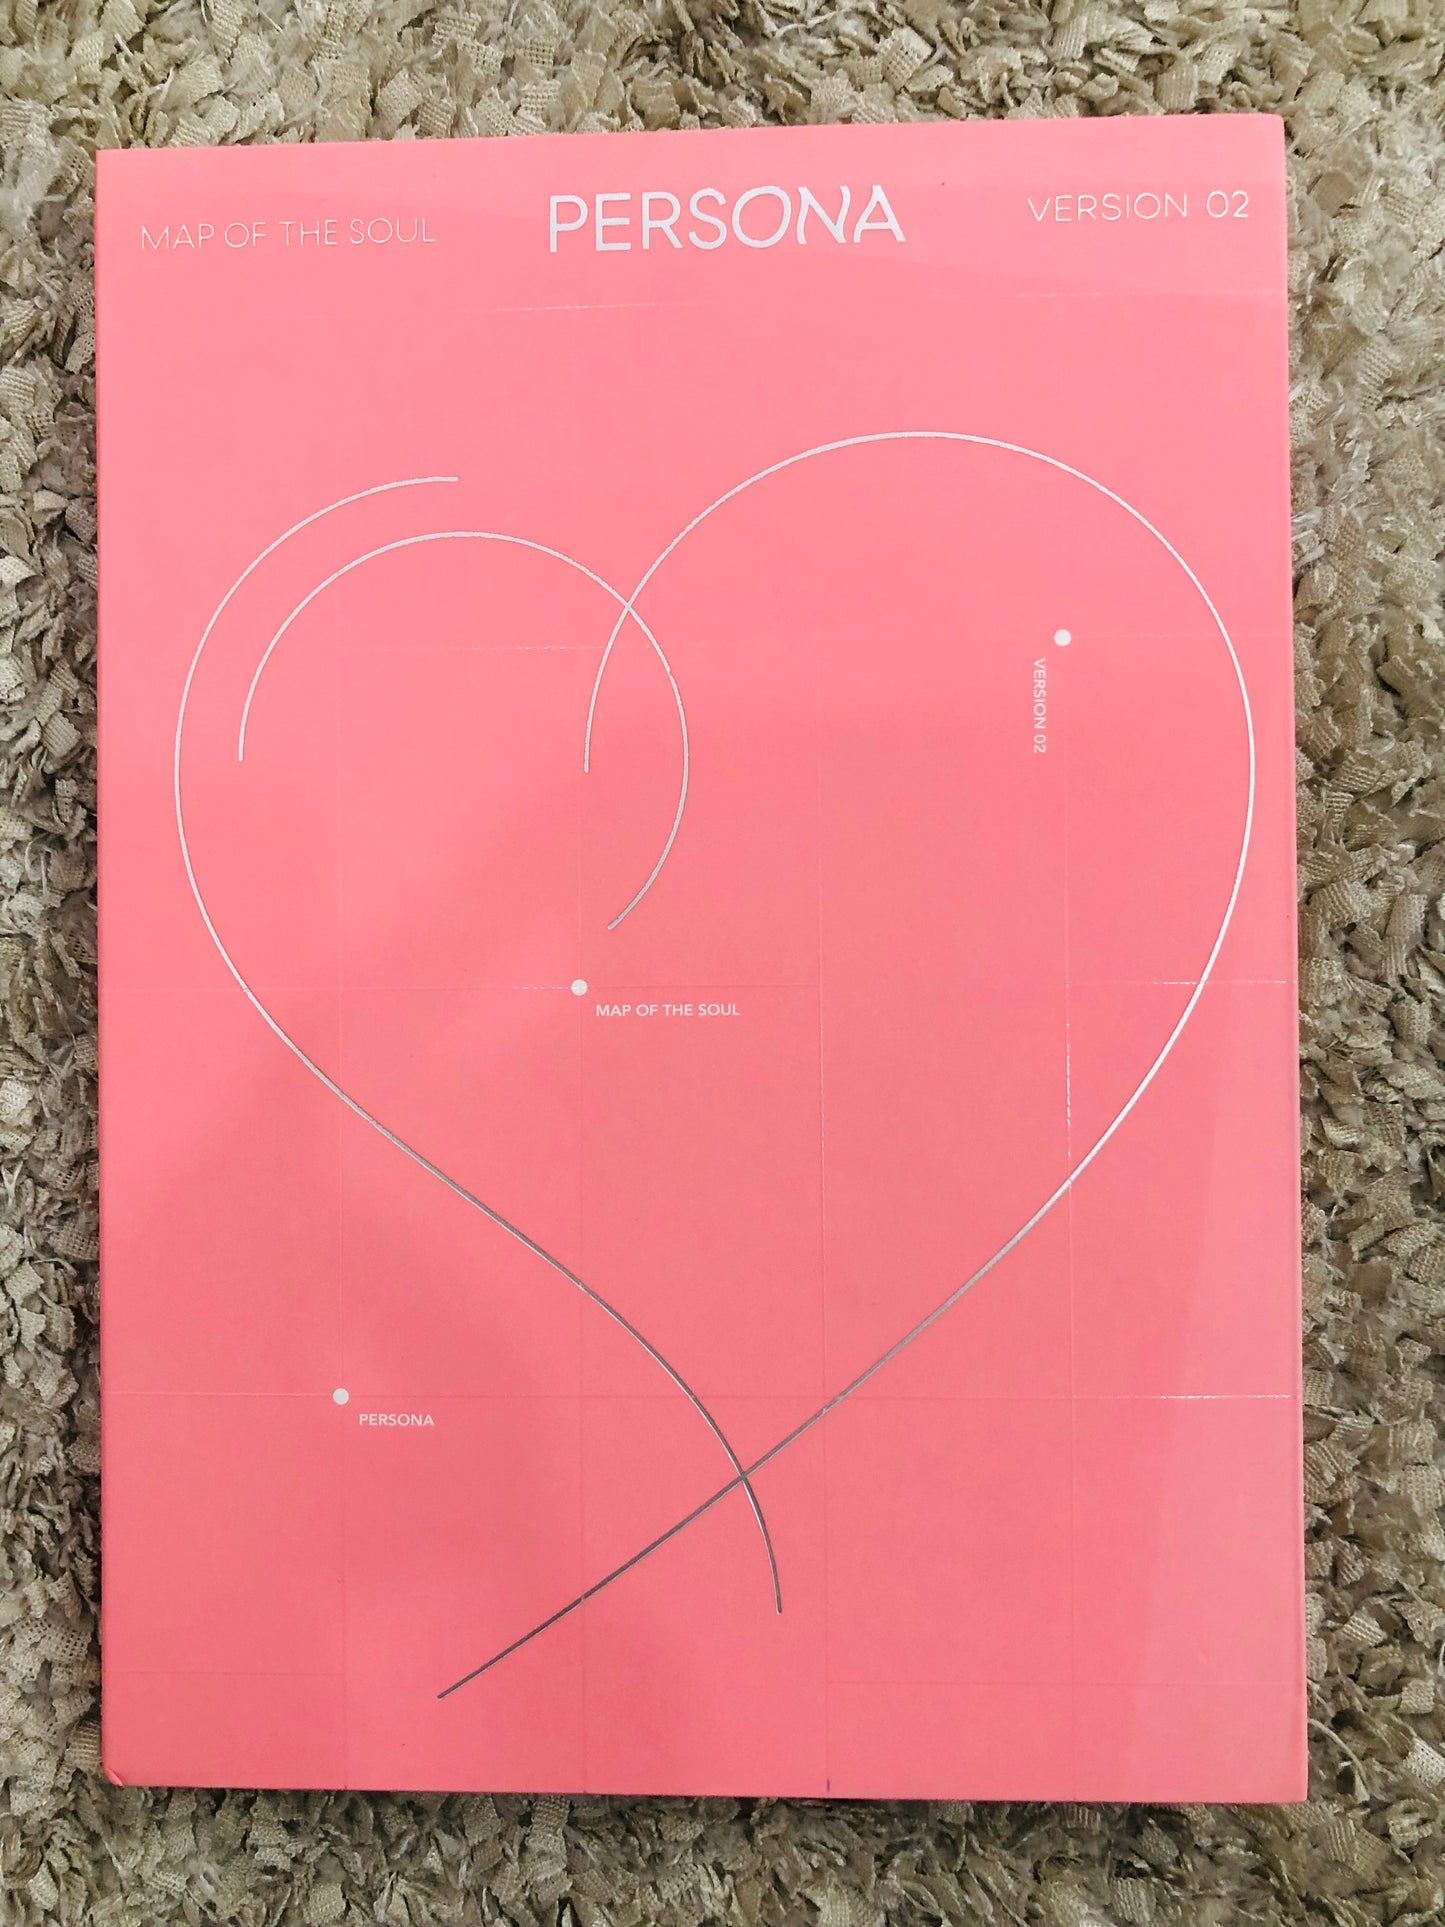 MOTS Persona Official Ver. 2 Album (Opened)